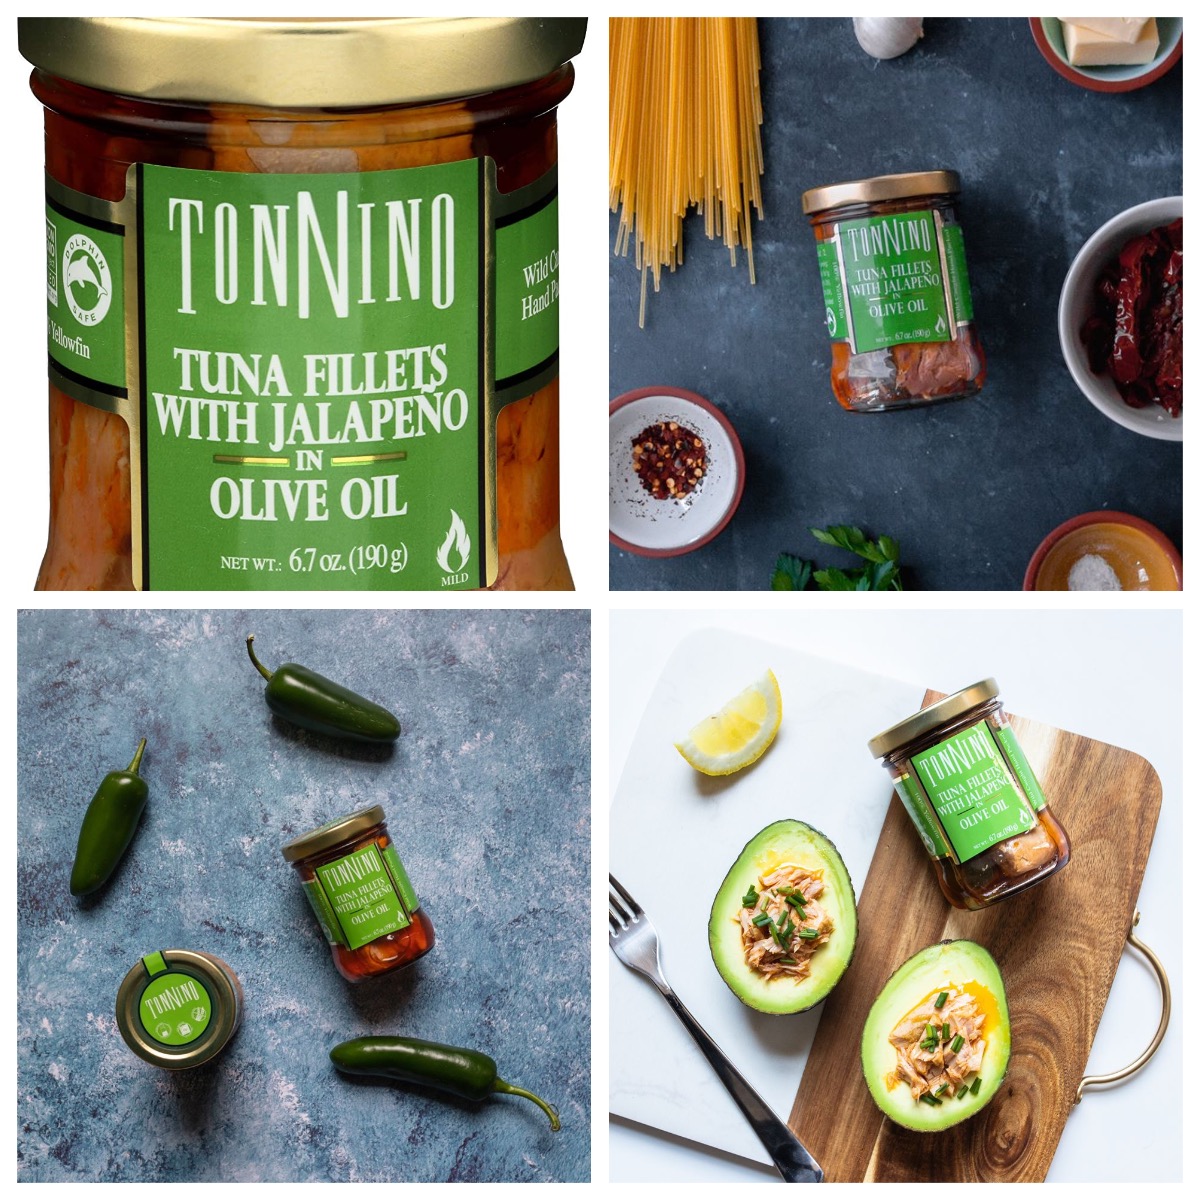 Tonnino Tuna Fillets With Jalapeno In Olive Oil